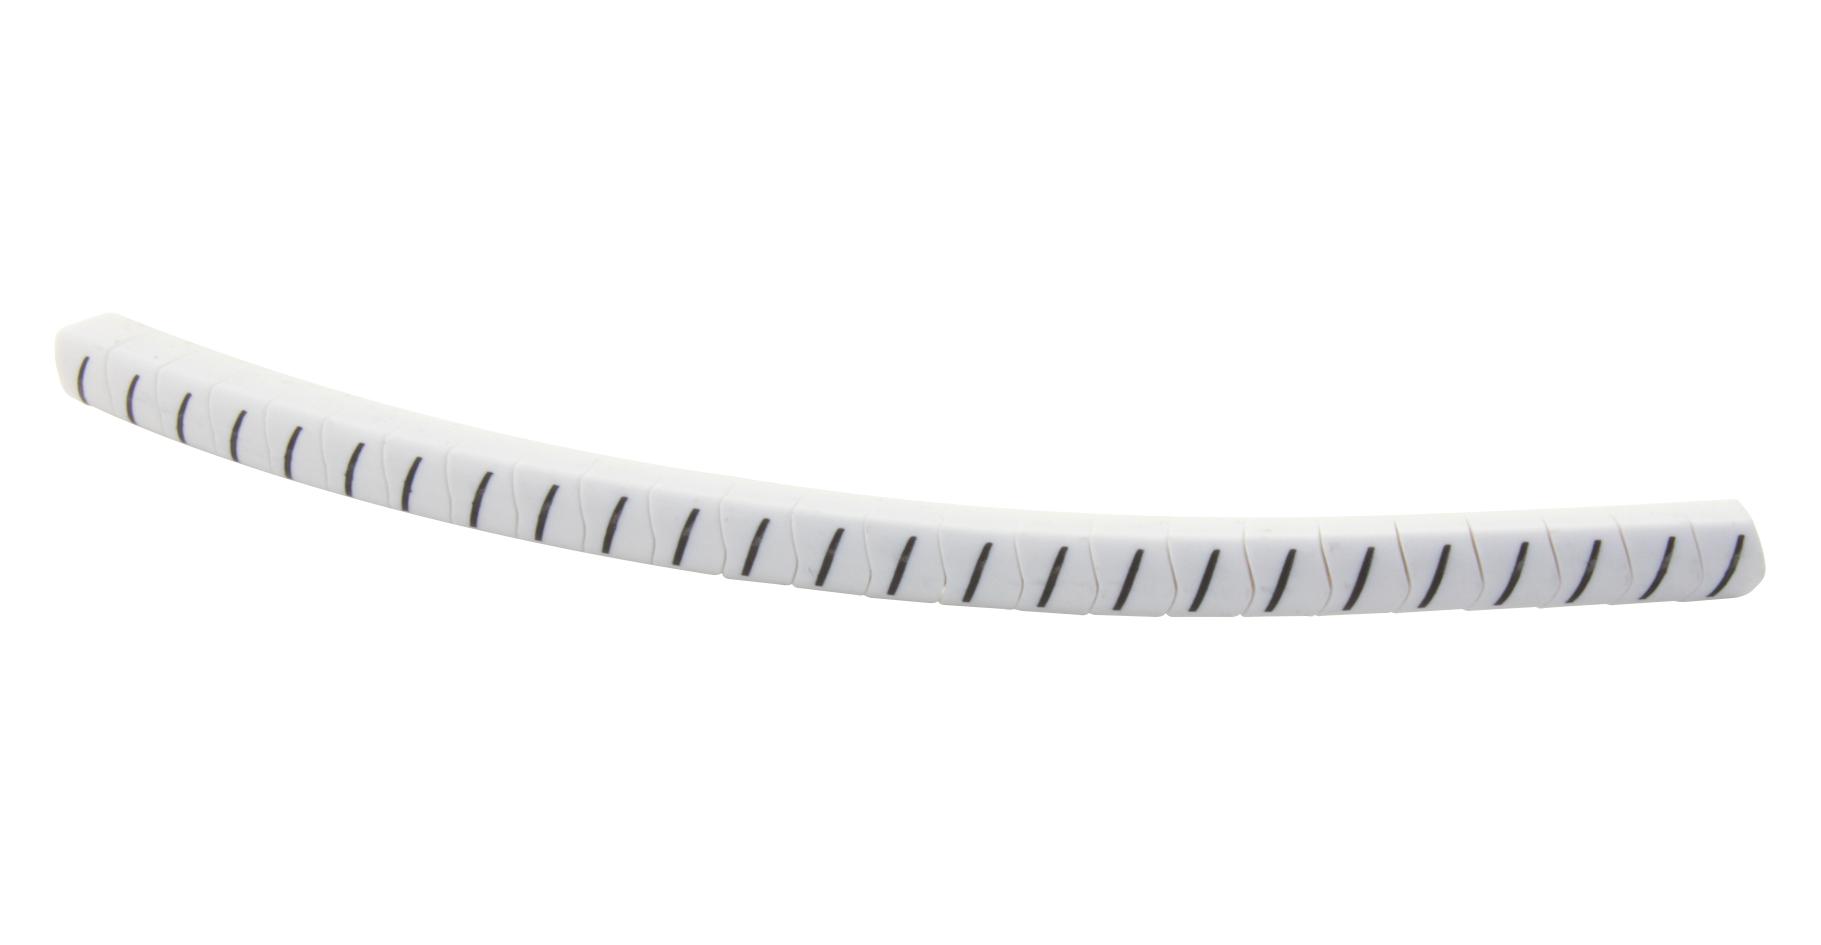 901-11063 CABLE MARKER, PRE PRINTED, PVC, WHITE HELLERMANNTYTON